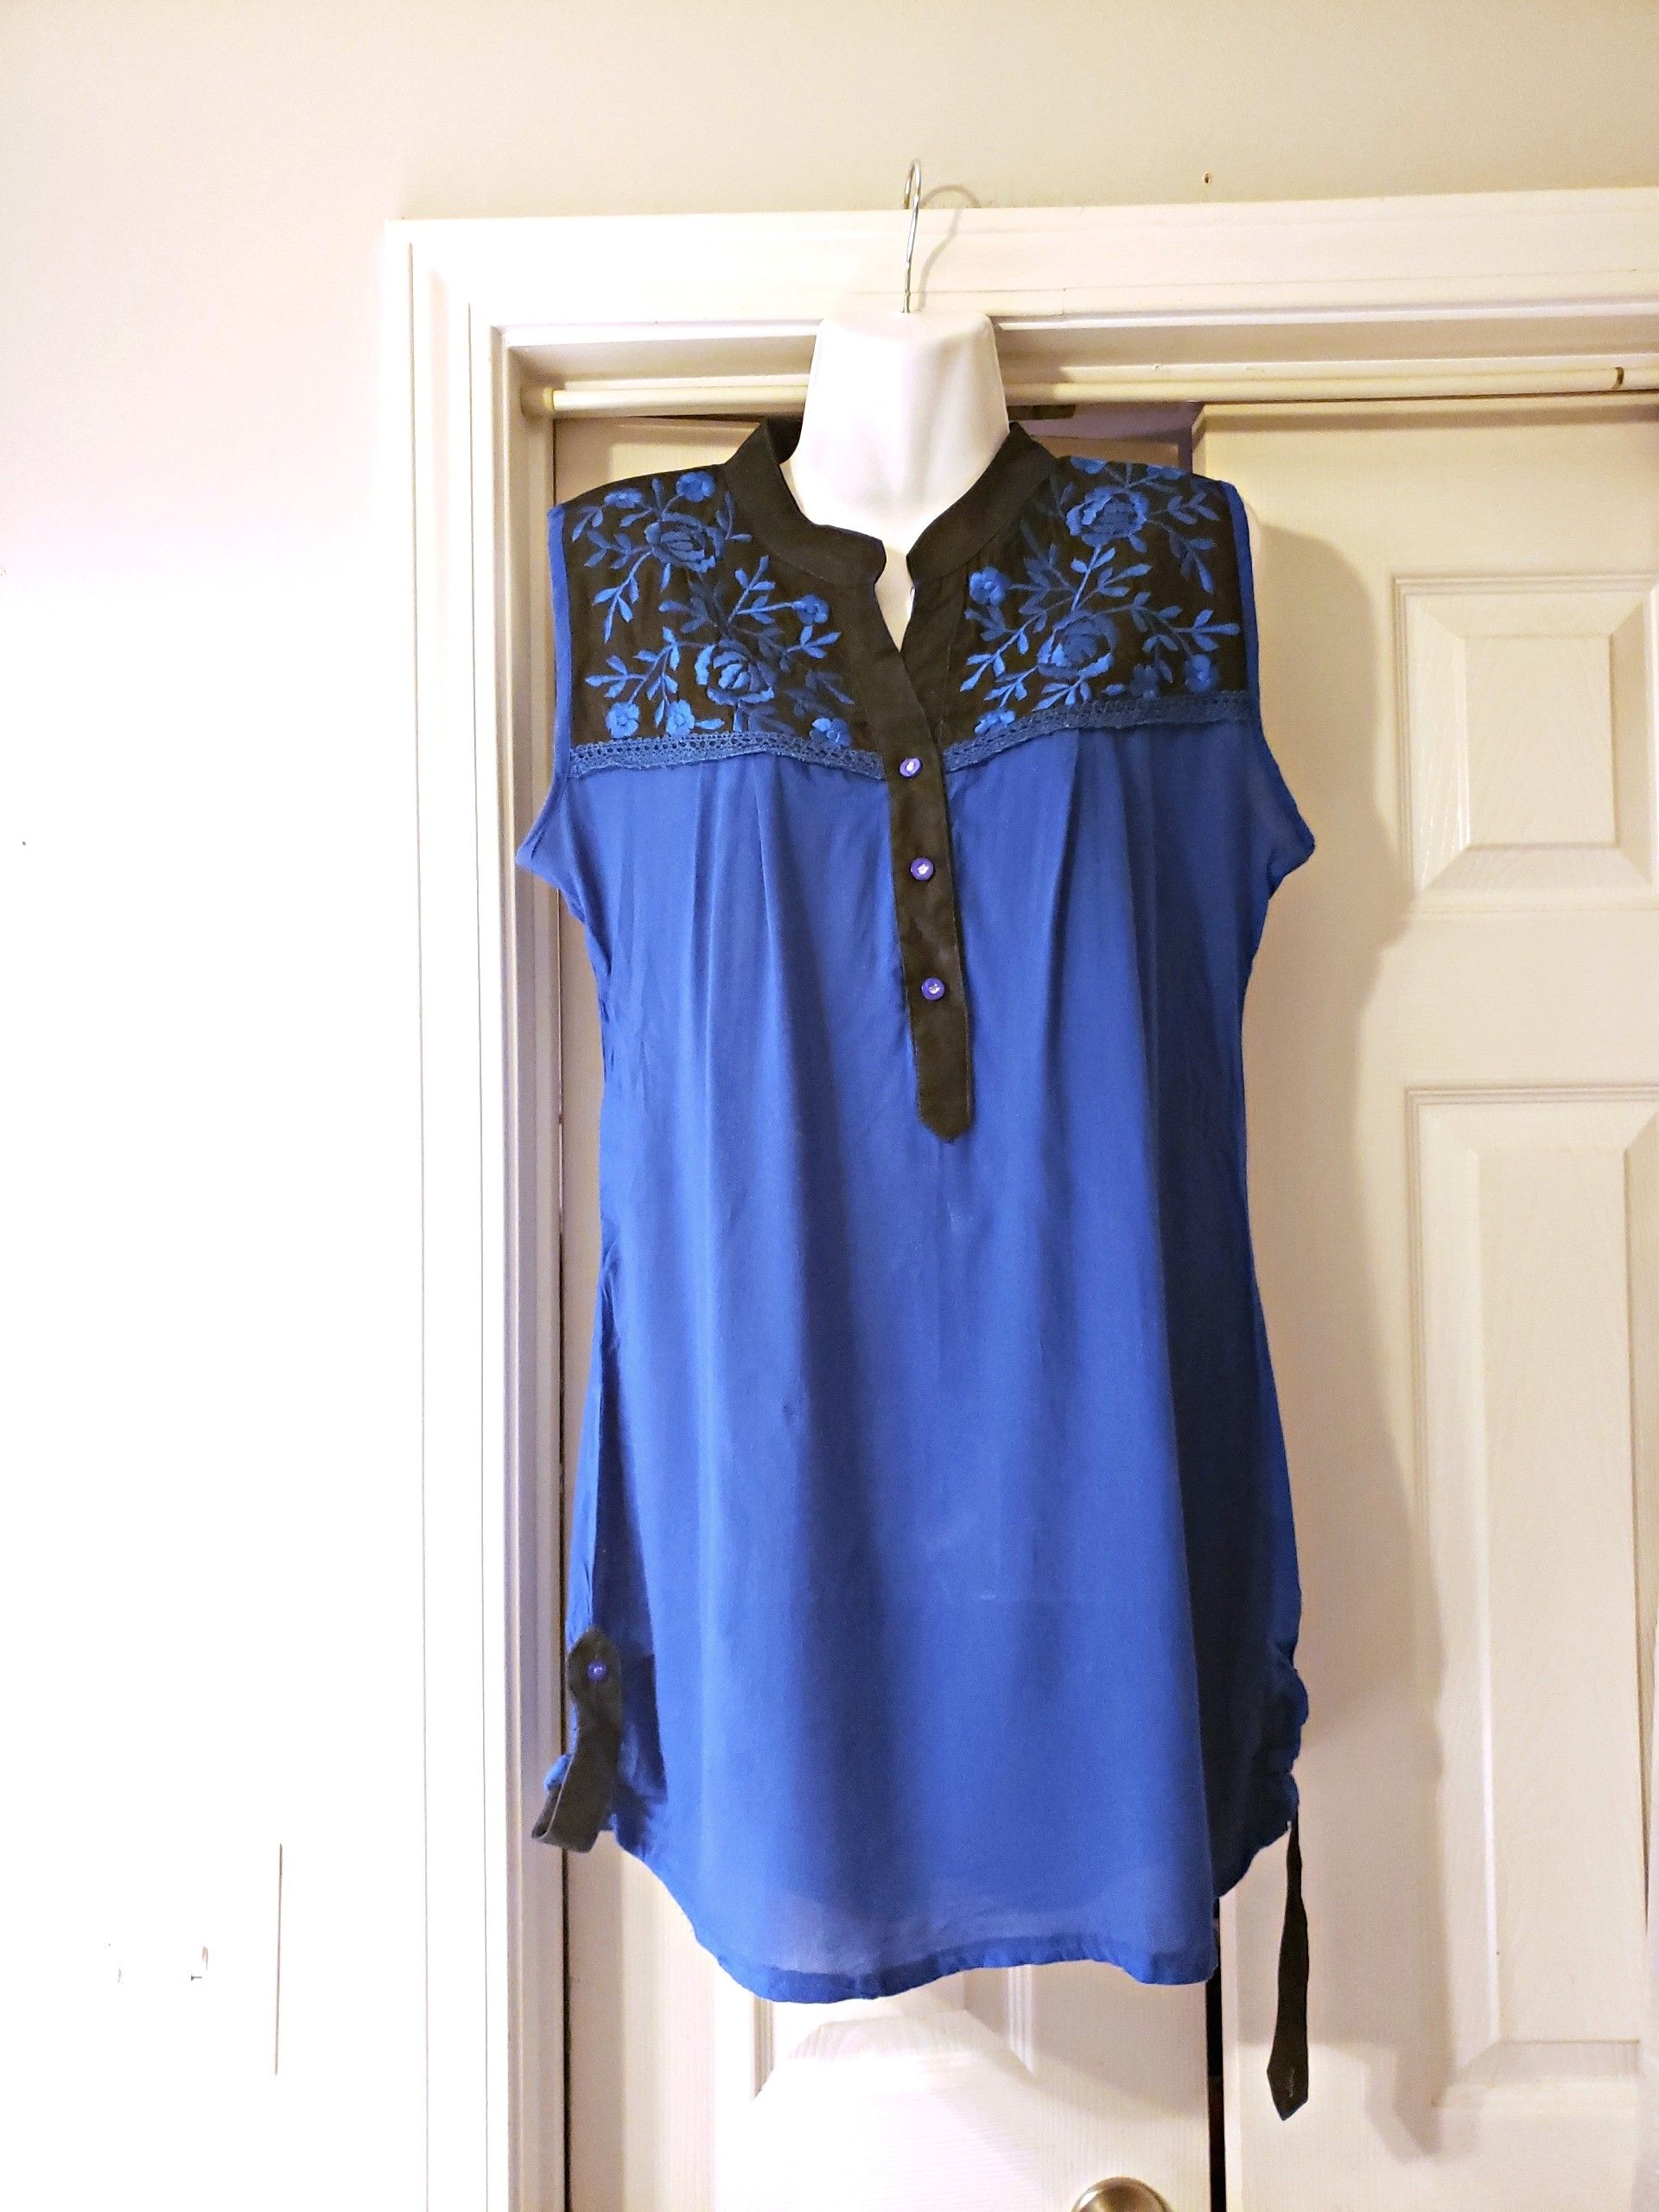 FAIRLY NEW BLUE AND BLACK DRESS PLUS SIZE WITH FLOWERS SIZE XXL